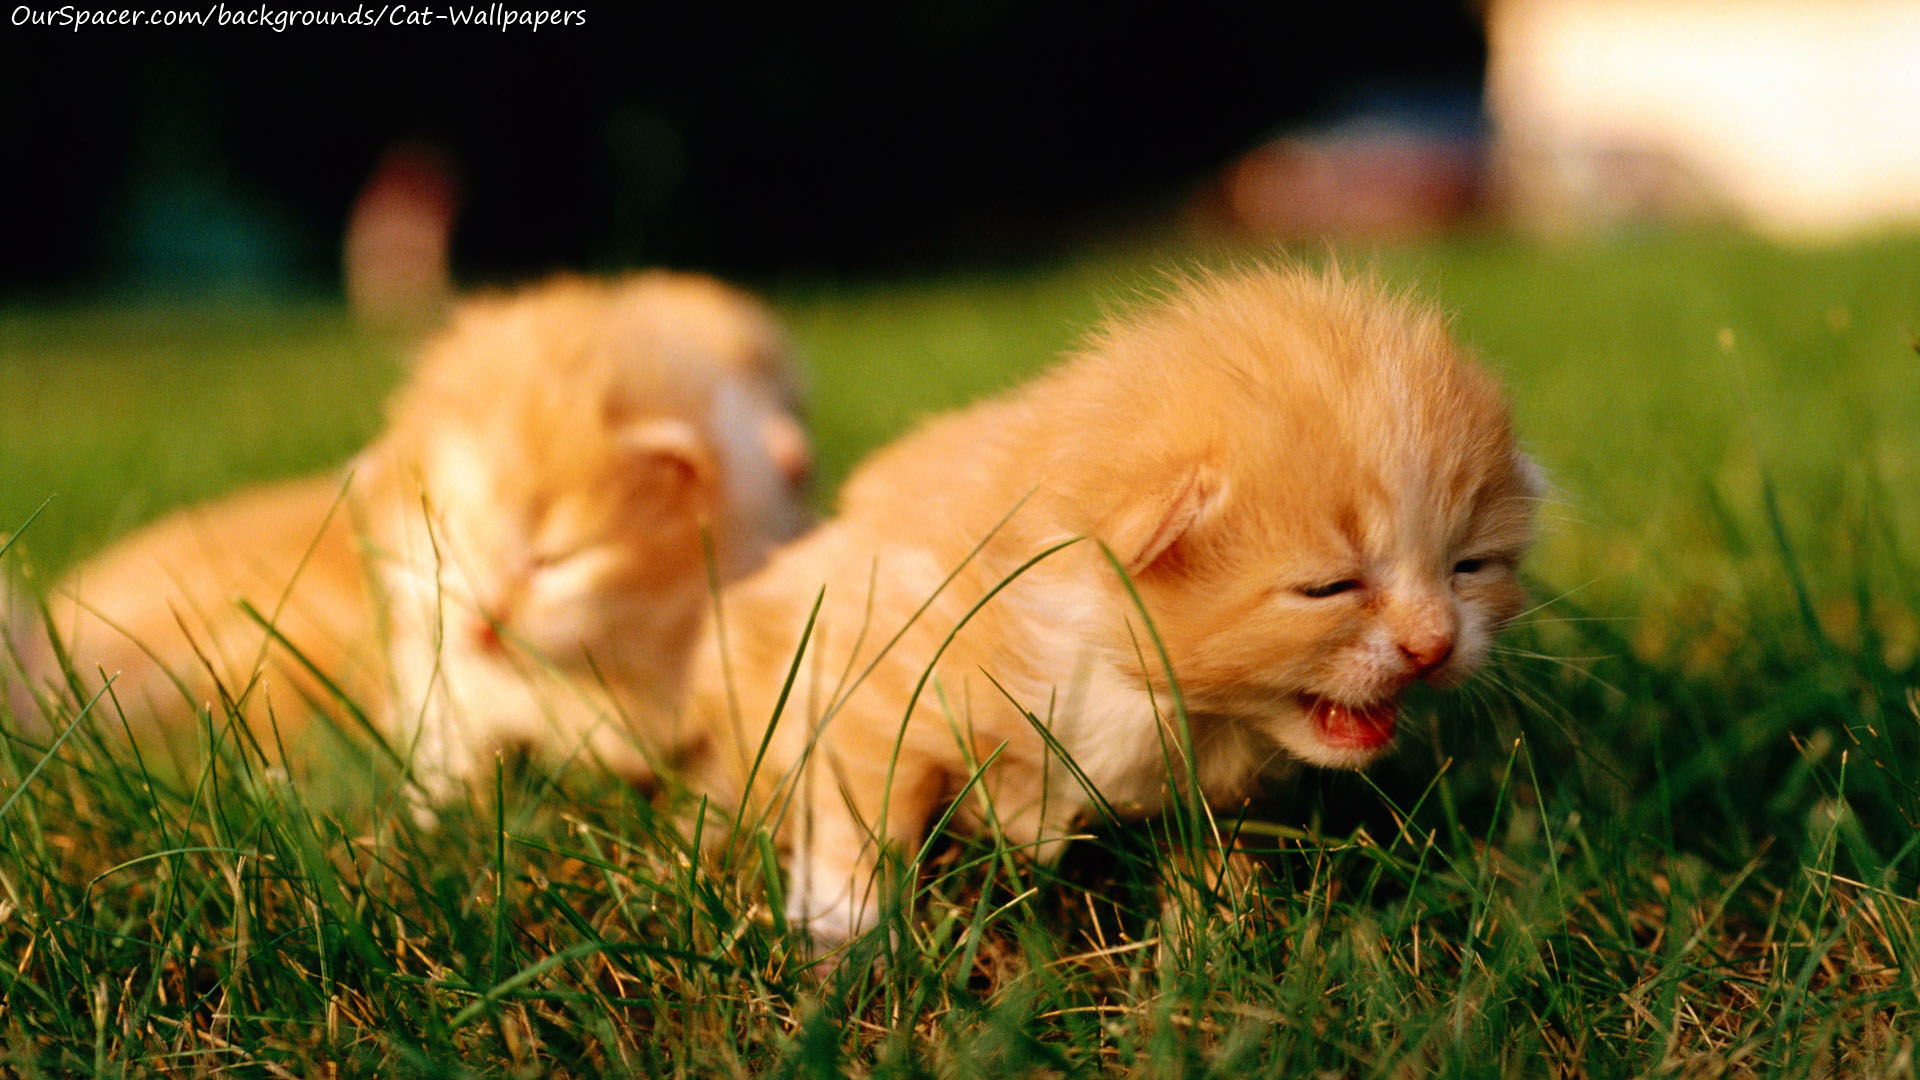 Two kittens, one kitten is yawning wallpapers for myspace, twitter, and hi5 backgrounds